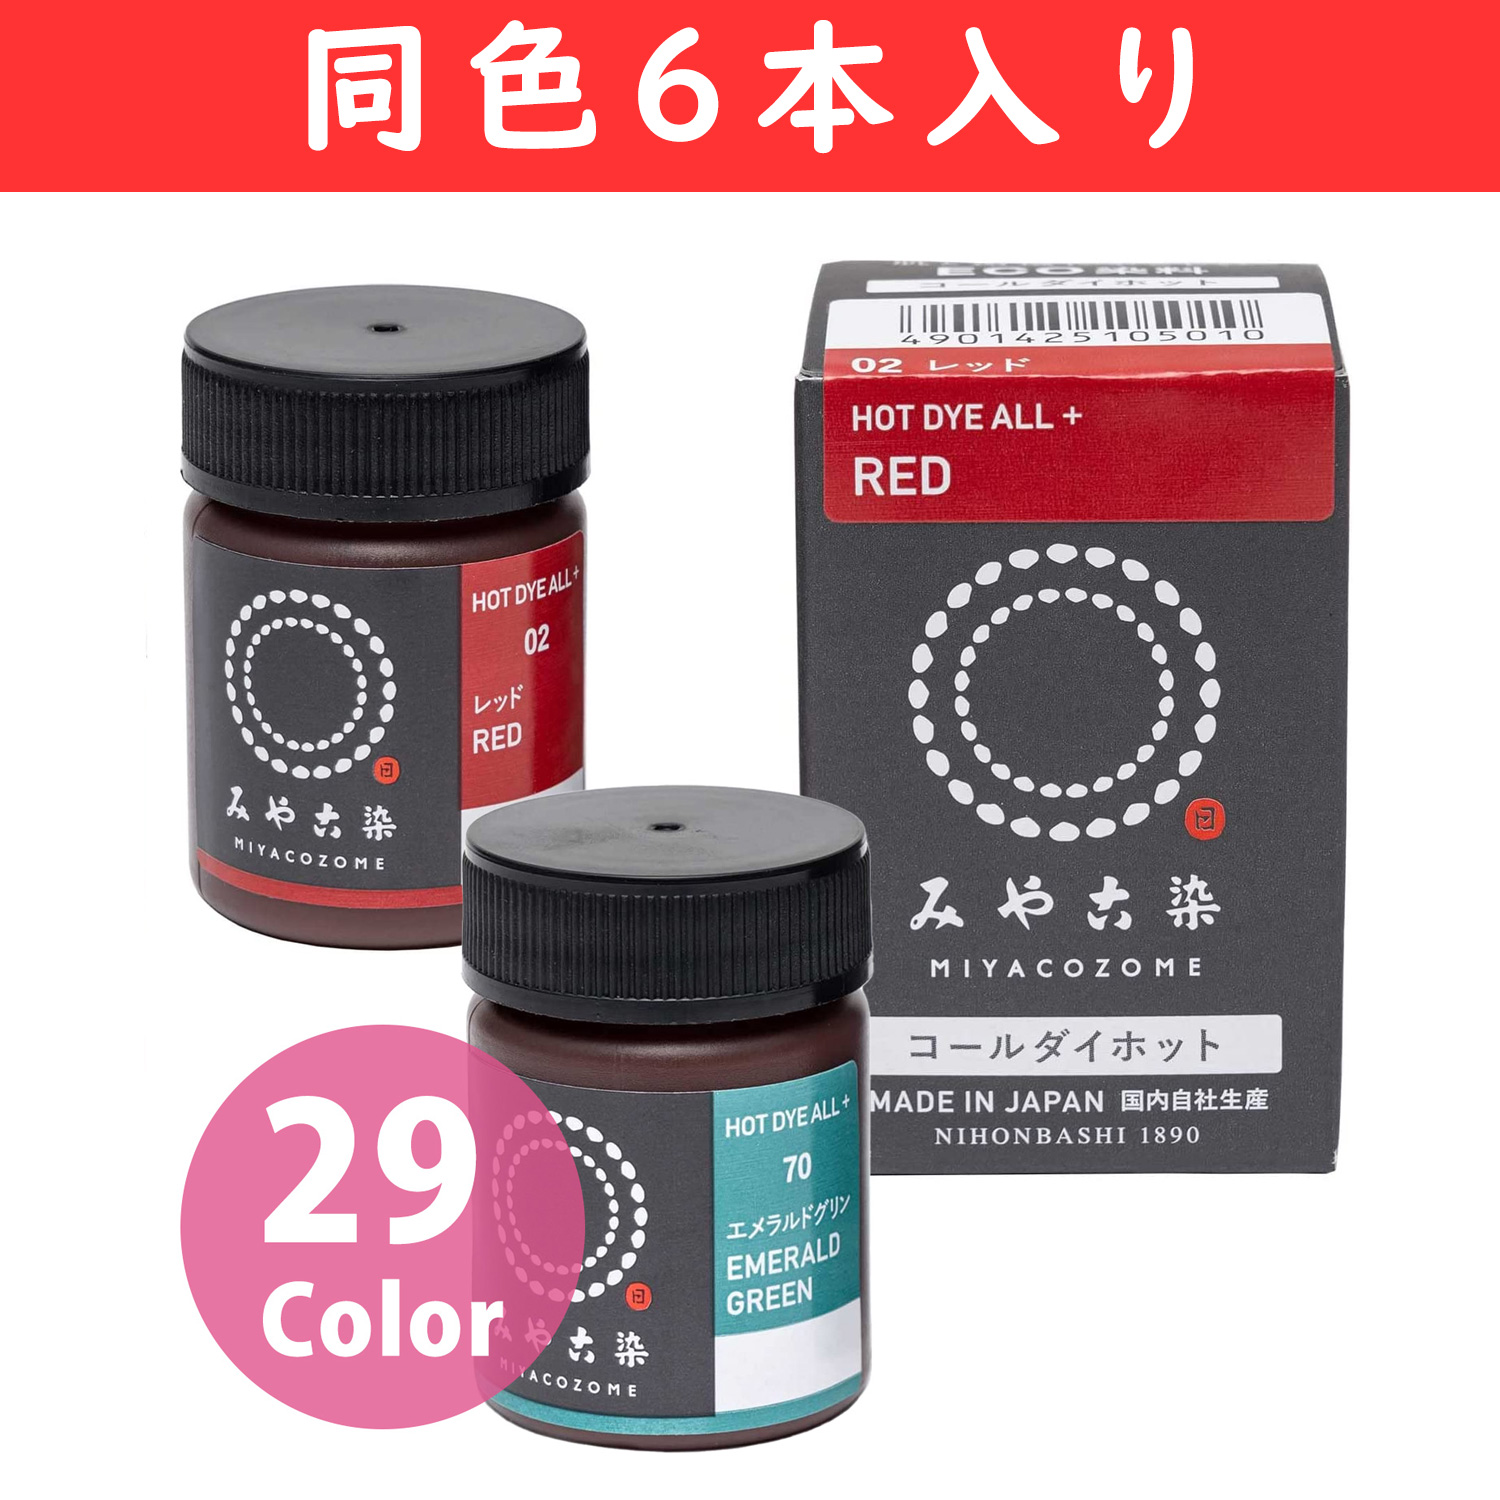 Miyako Dye Cold & Hot Dye ECO approx. 20g in a plastic container Same color 6 pieces (set)